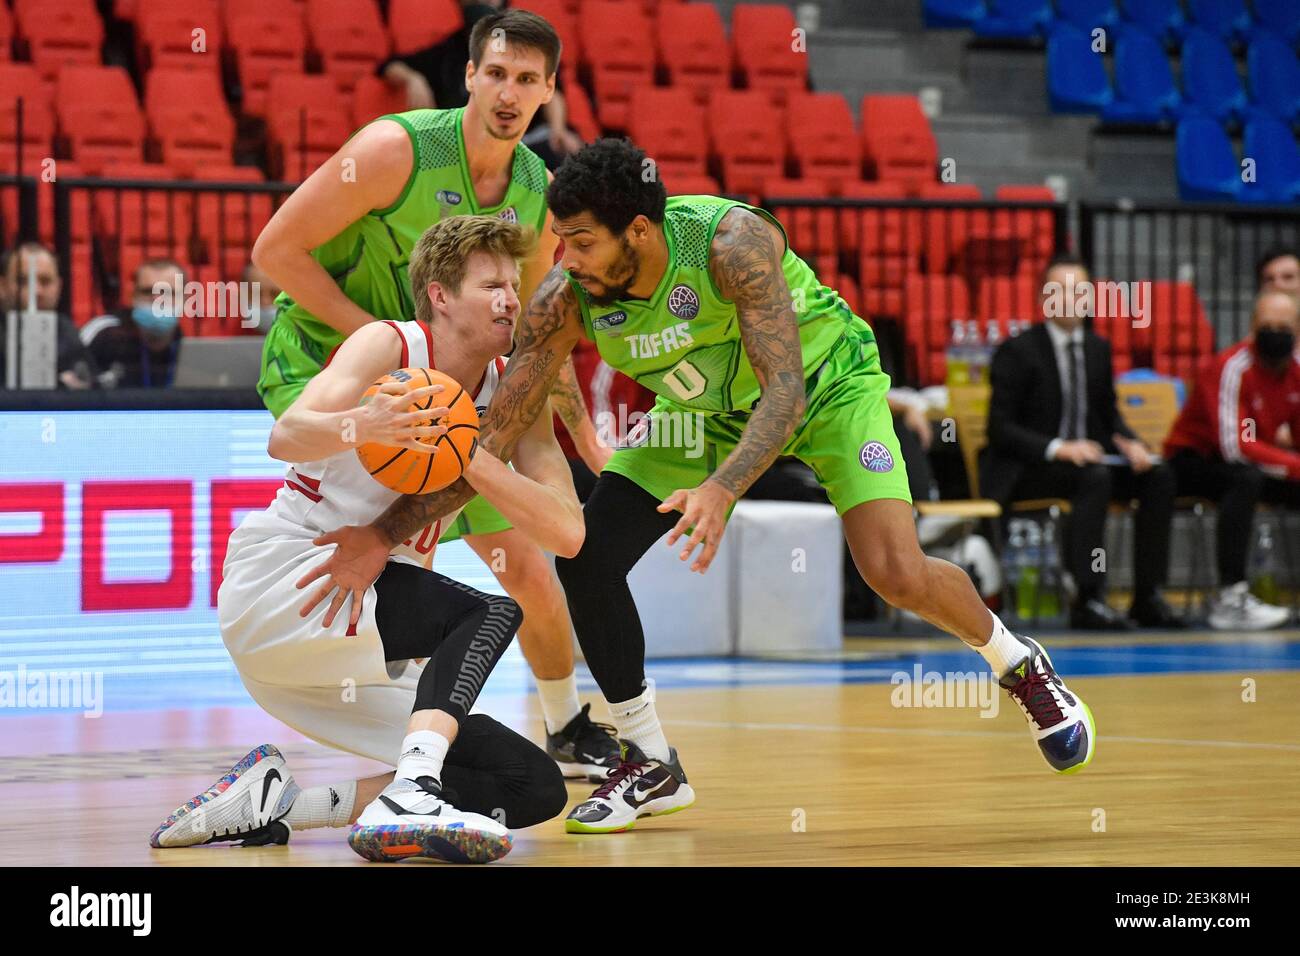 Nymburk, Czech Republic. 19th Jan, 2021. (L-R) Hayden Dalton of Nymburk,  Tomislav Zubcic and DeVaughn Akoon-Purcell of Bursa in action during the  men's Basketball League 6th round, B group match Nymburk vs